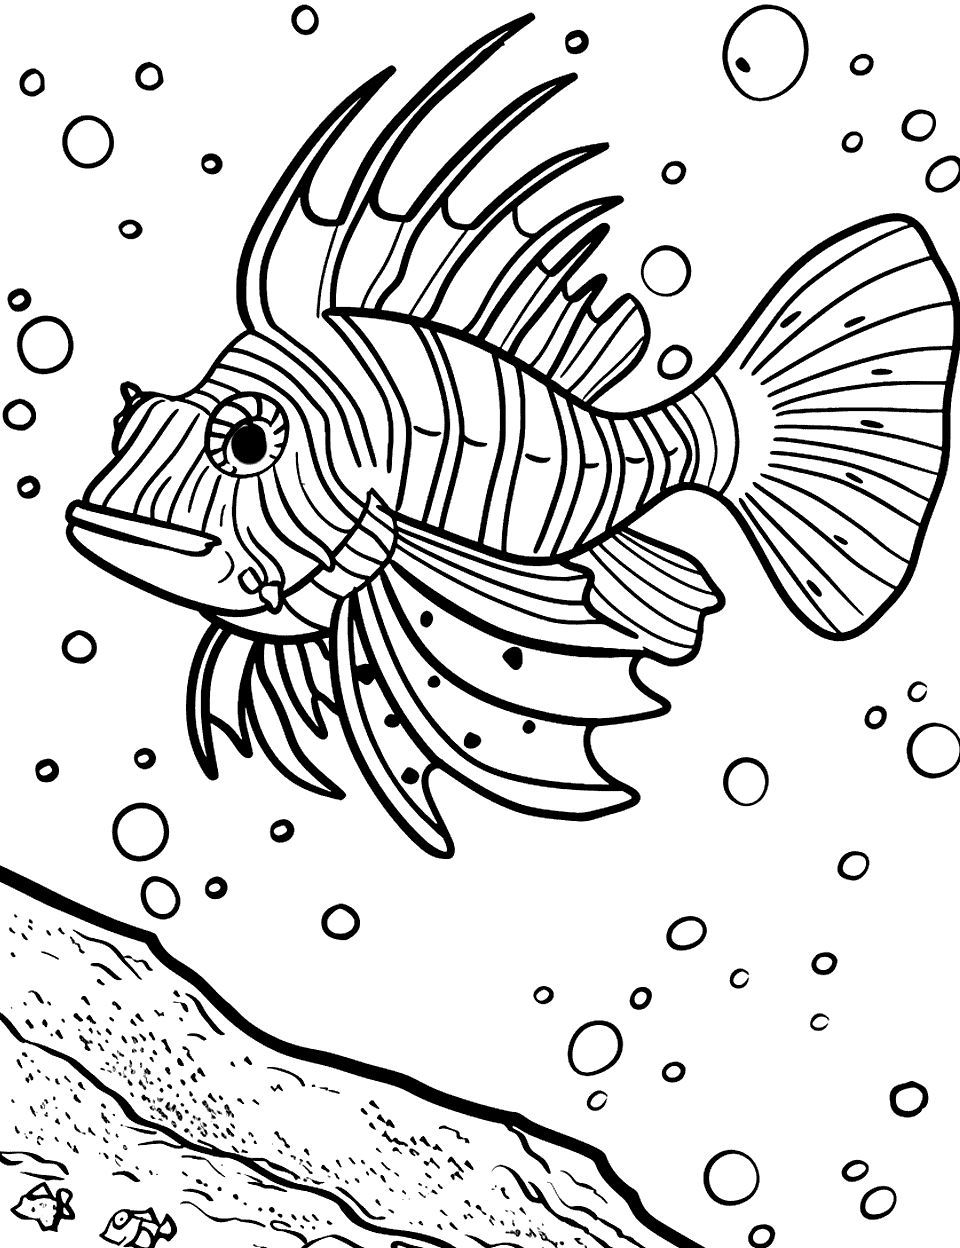 Lionfish Displaying Its Spines Sea Creature Coloring Page - A lionfish extends its spine as it floats above a rocky ledge.